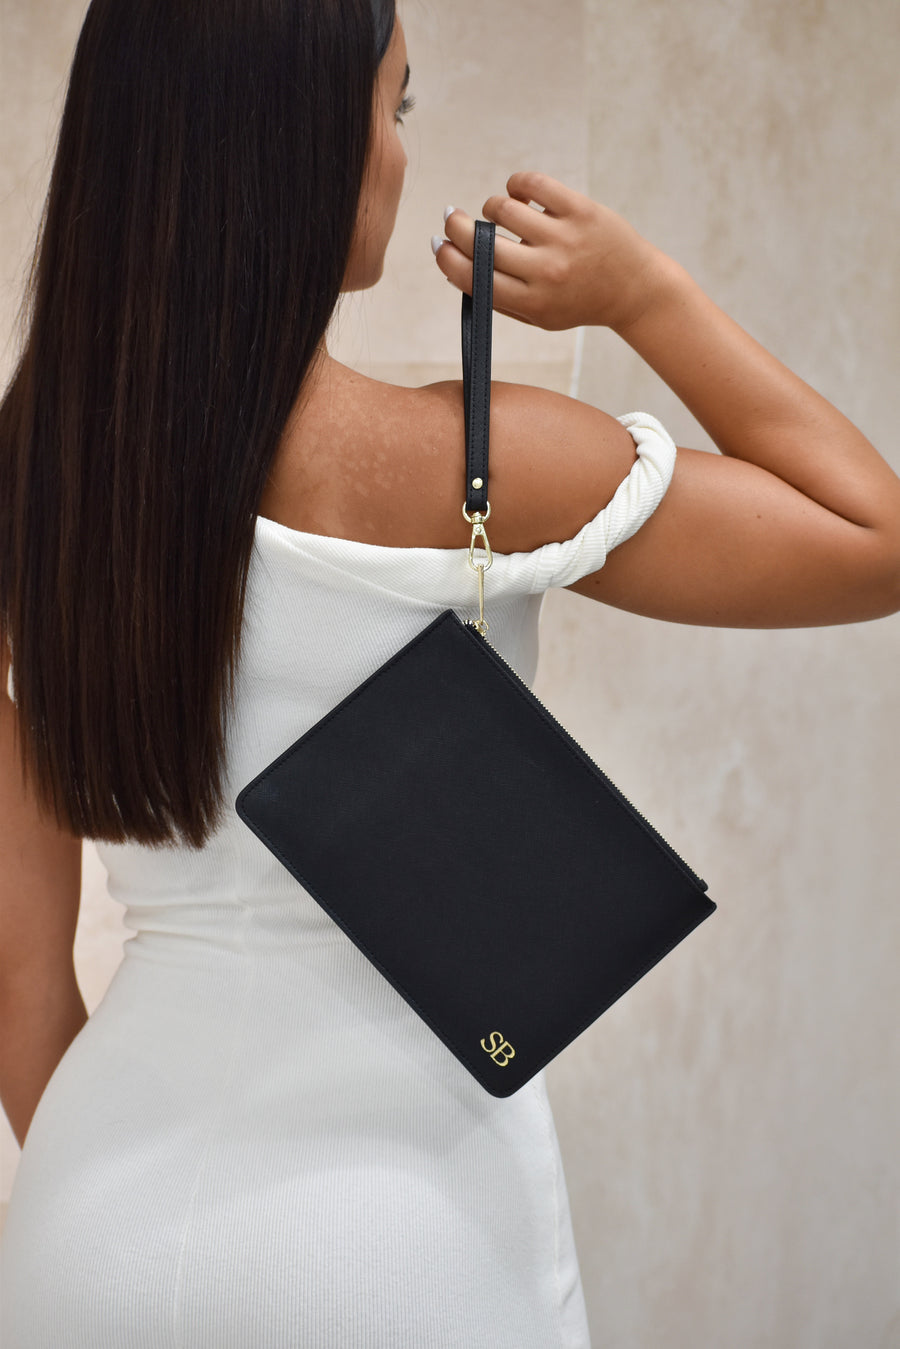 Personalised Leather Clutch - Black